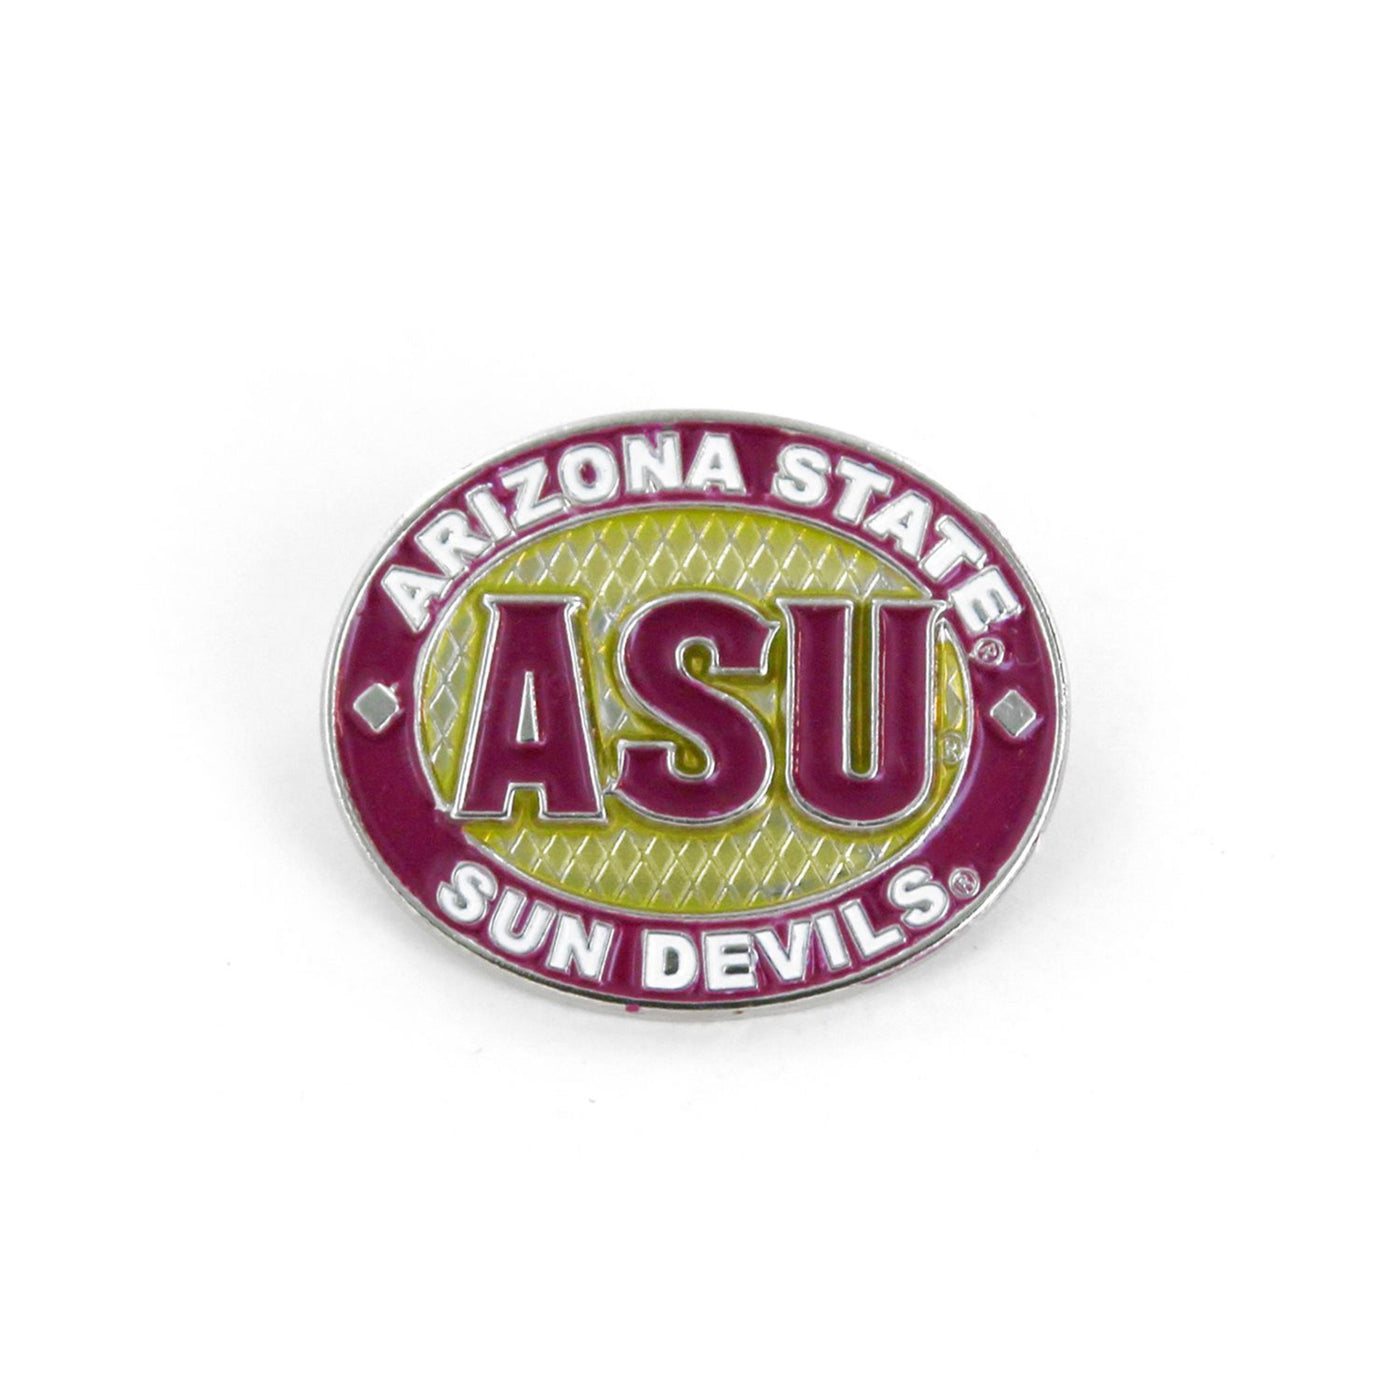 ASU oval Pin with a maroon border. Within the border is the text 